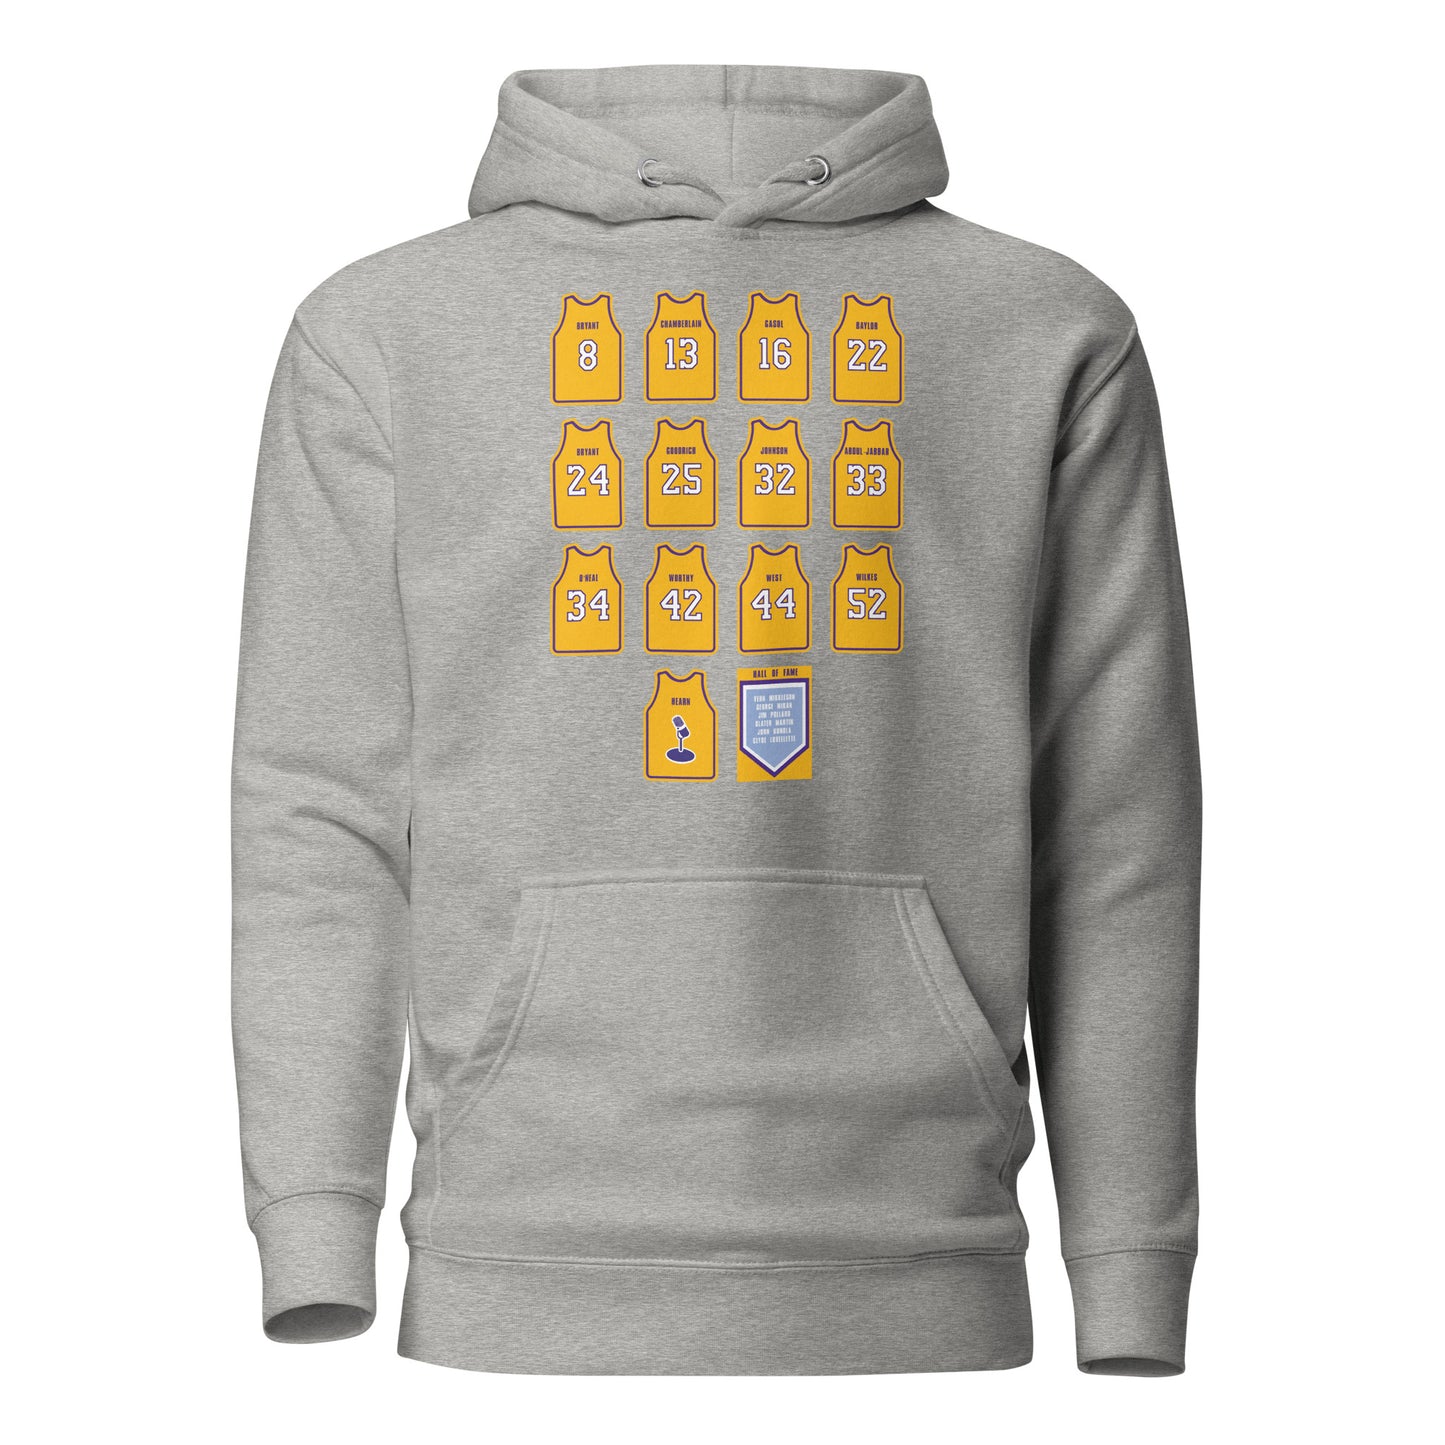 Los Angeles Lakers Retired Jerseys Illustrated Pullover Hoodie